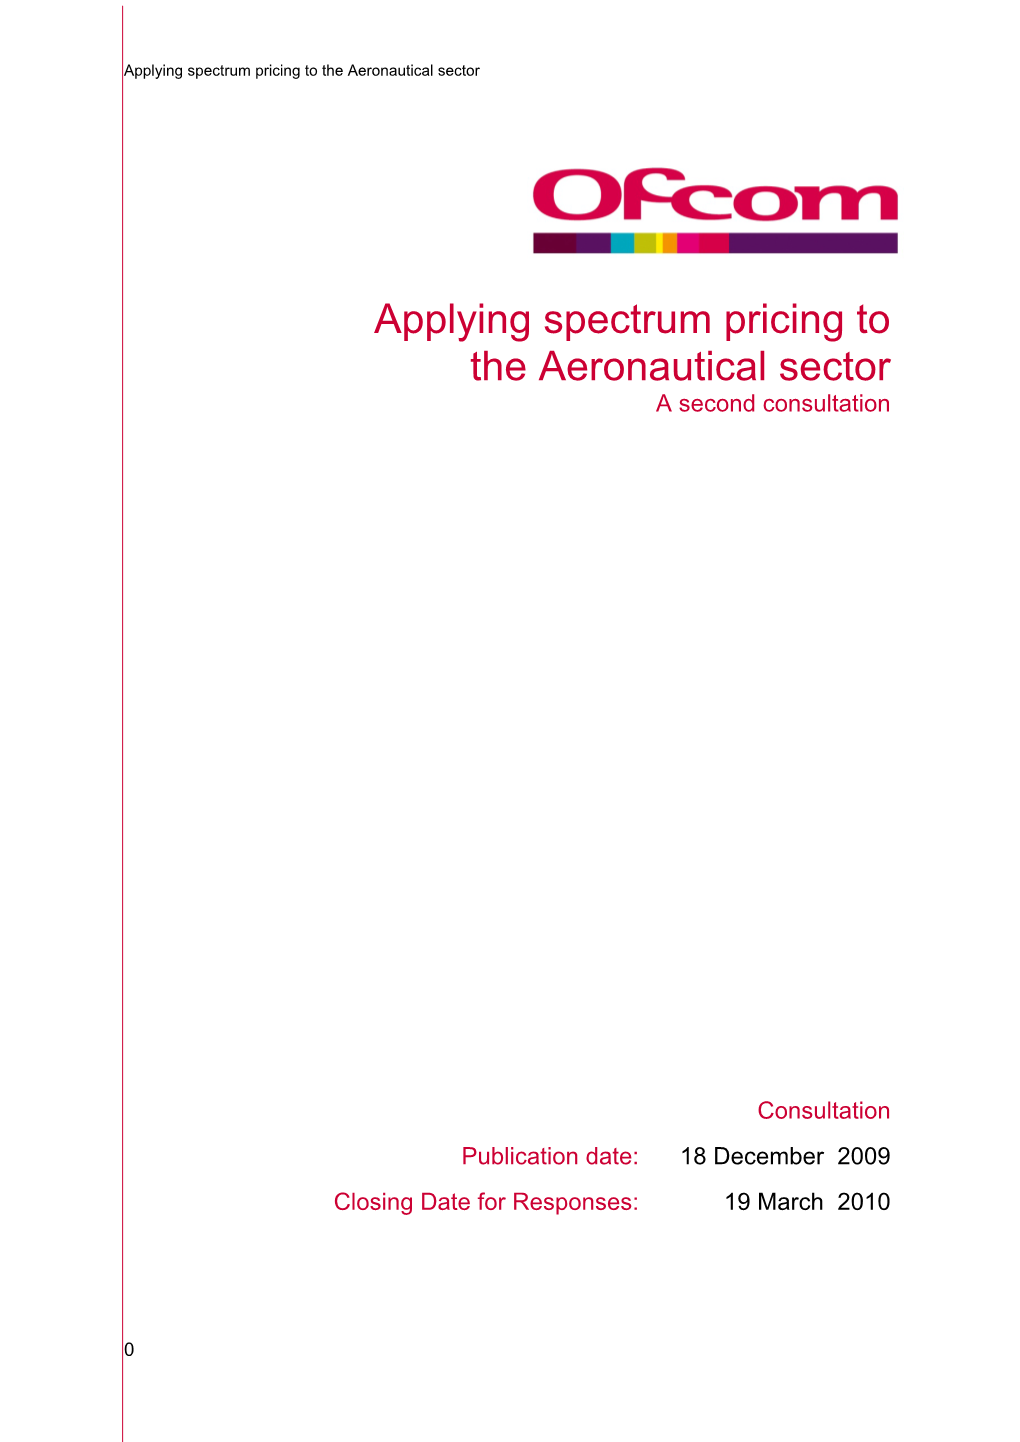 Applying Spectrum Pricing to the Aeronautical Sector